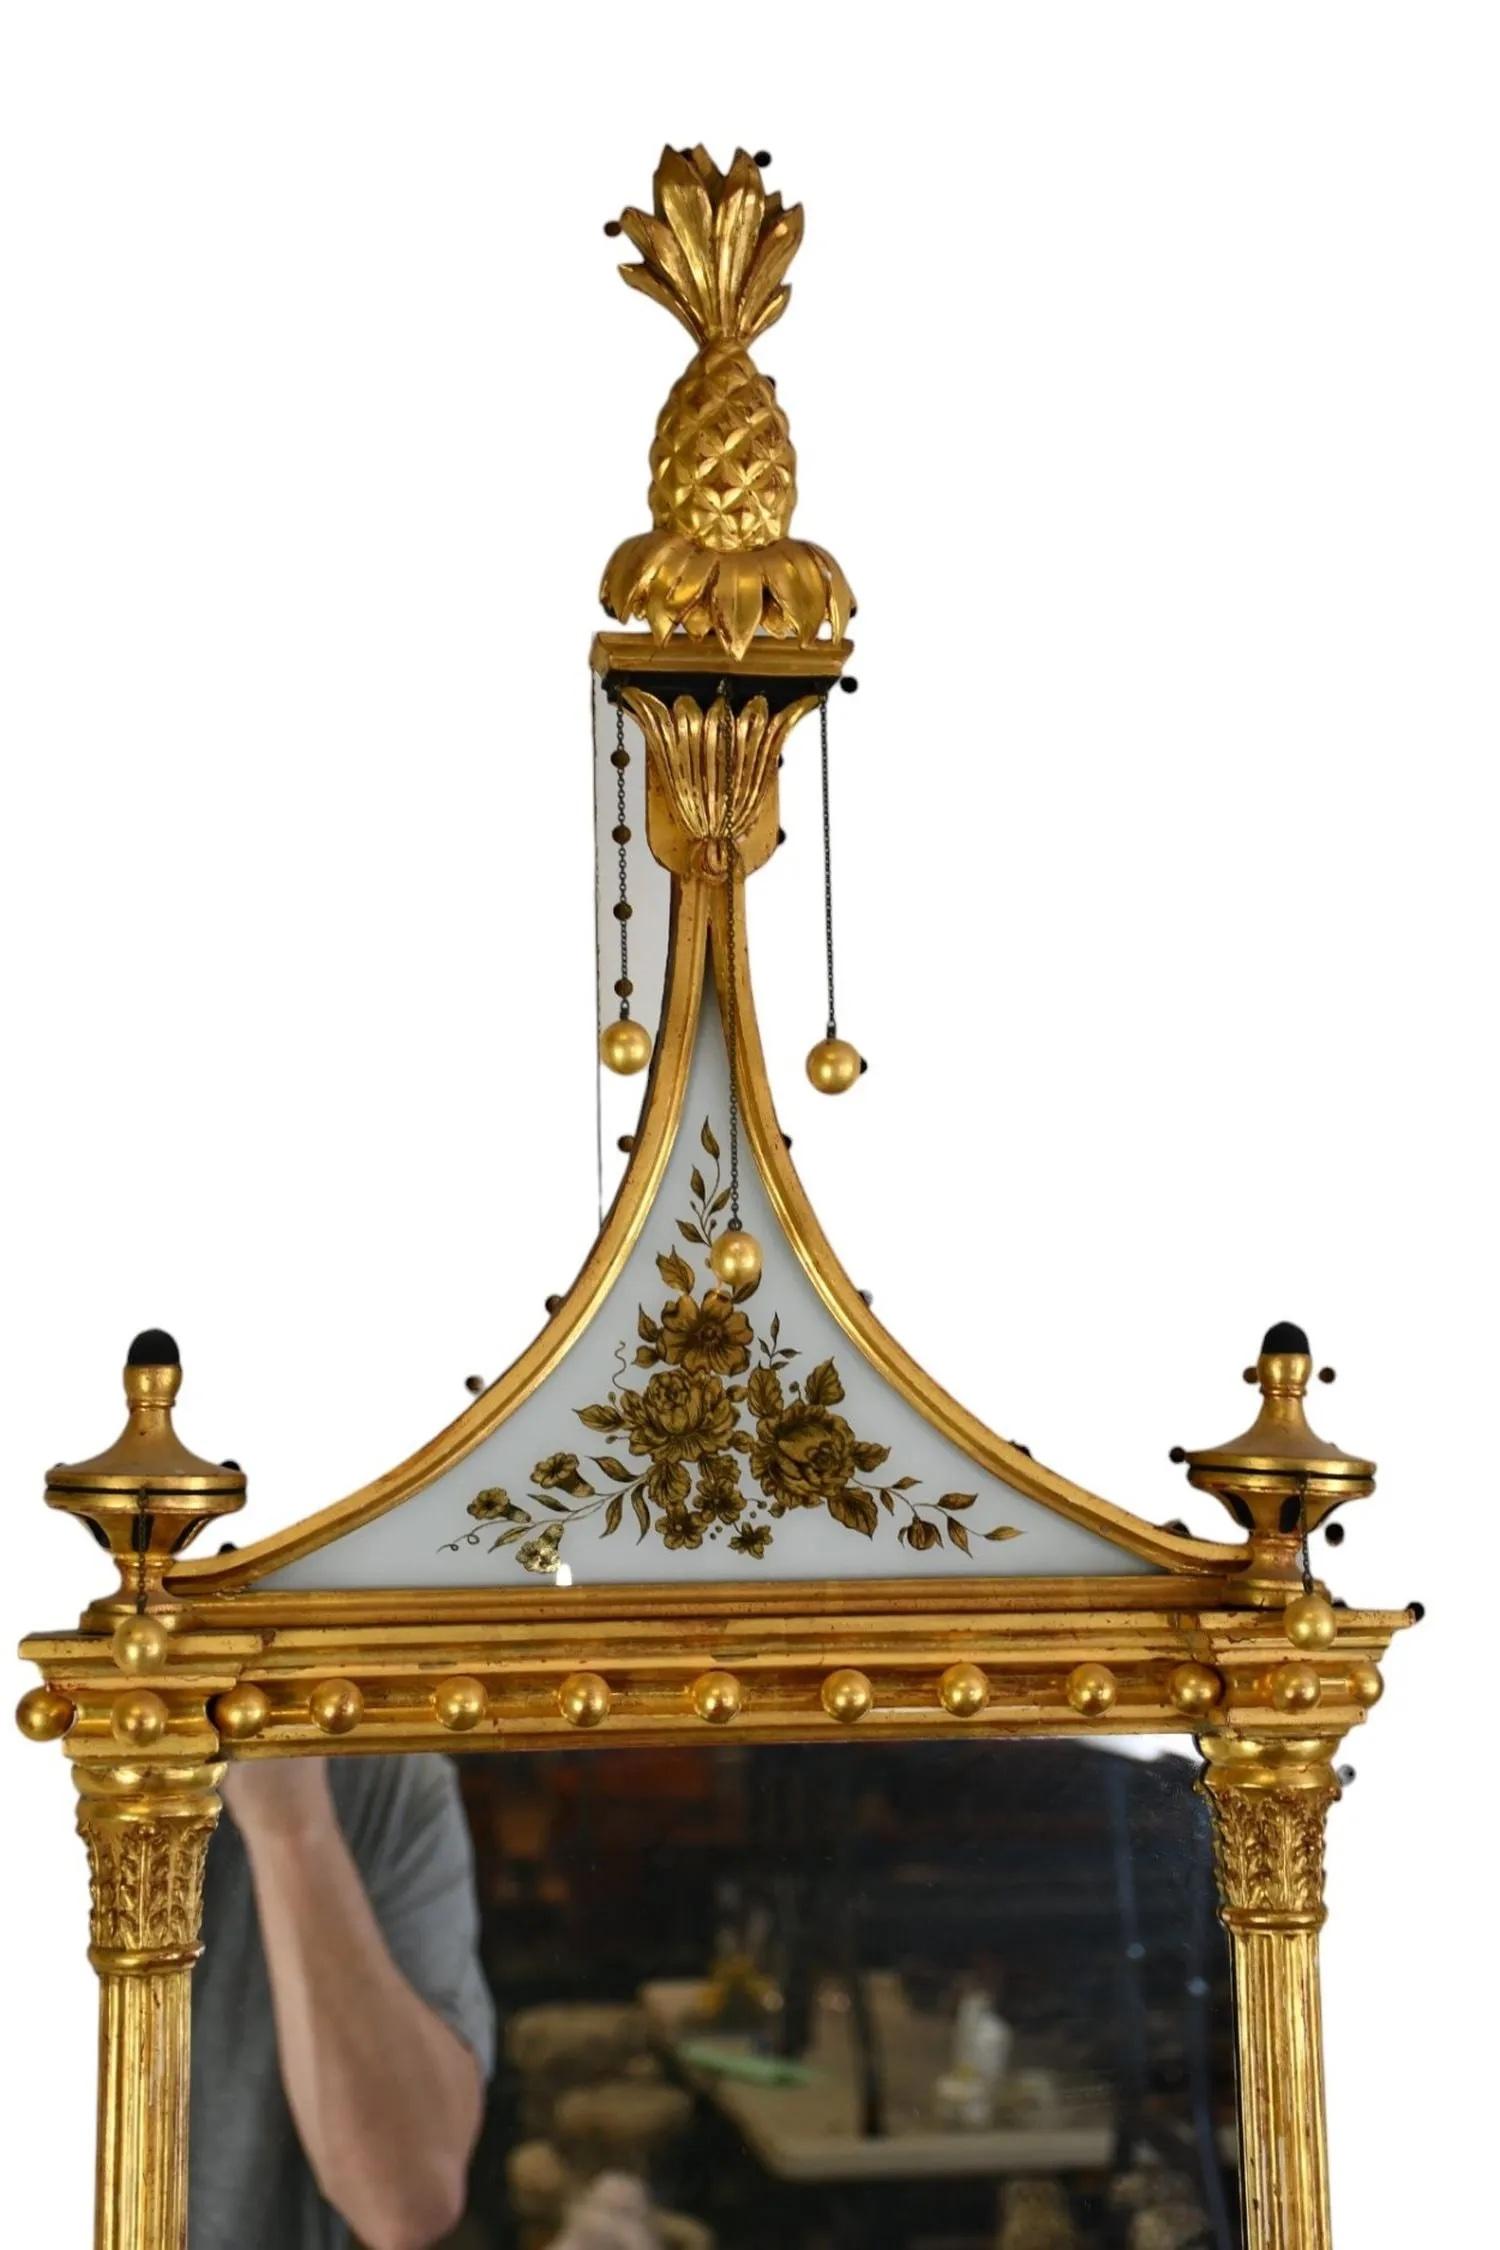 Pair of American Federal Hepplewhite Mirrors with Pineapple Finials.  Wonderful pediment shaped eglomise panels with floral gilt.  Gilded balls and columns.  A true pair. Possibly Albany, New York

Provenance: Purchased at The Winter Antique Show,